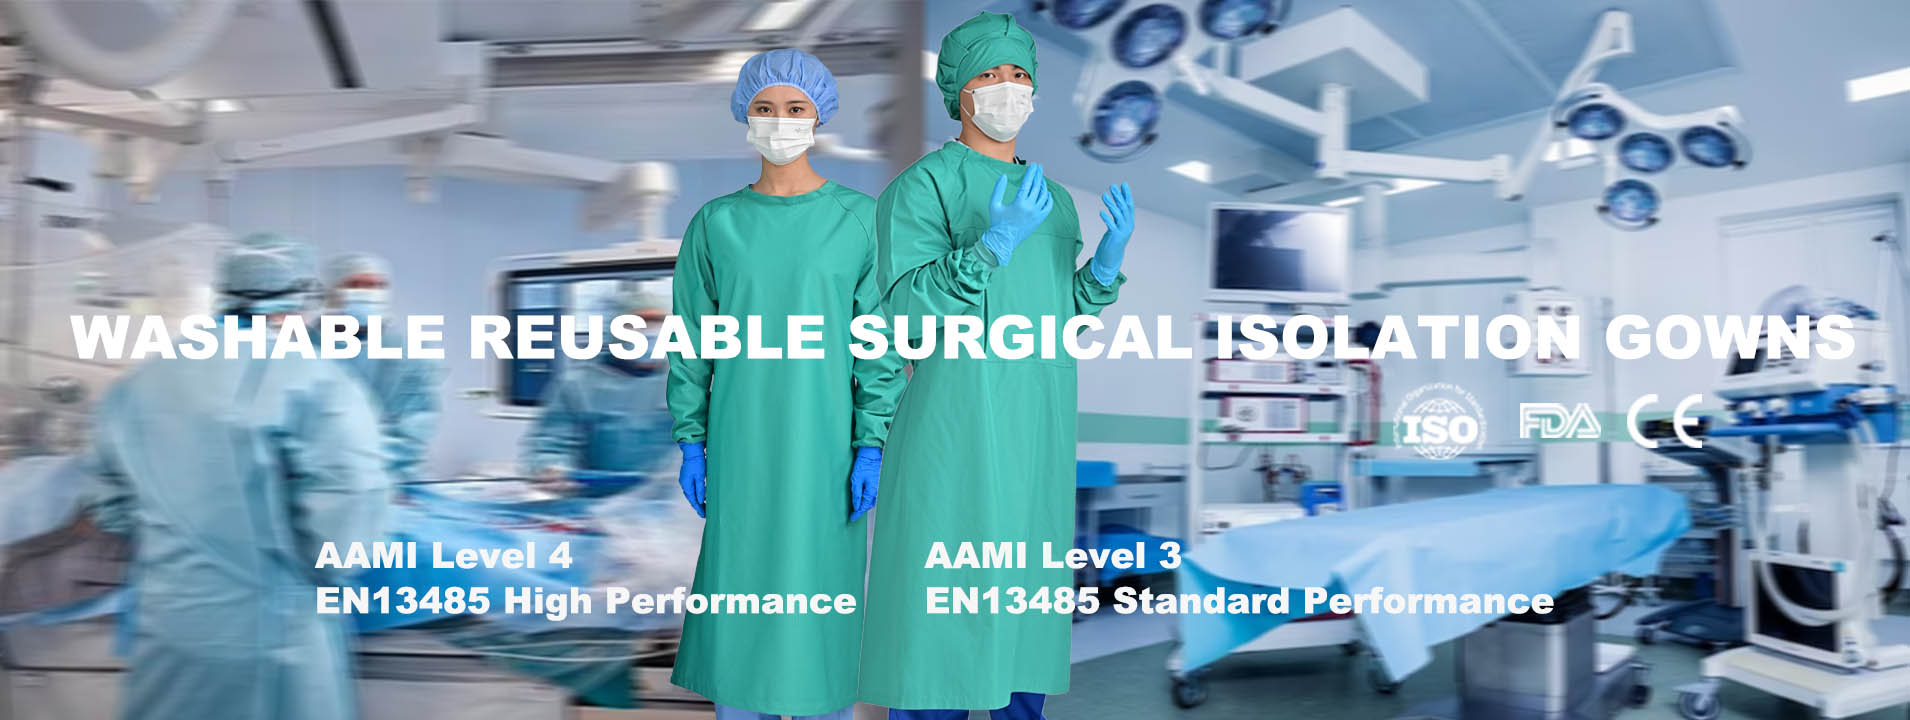 Washable Reusable Surgical Gown Solution Manufacturer